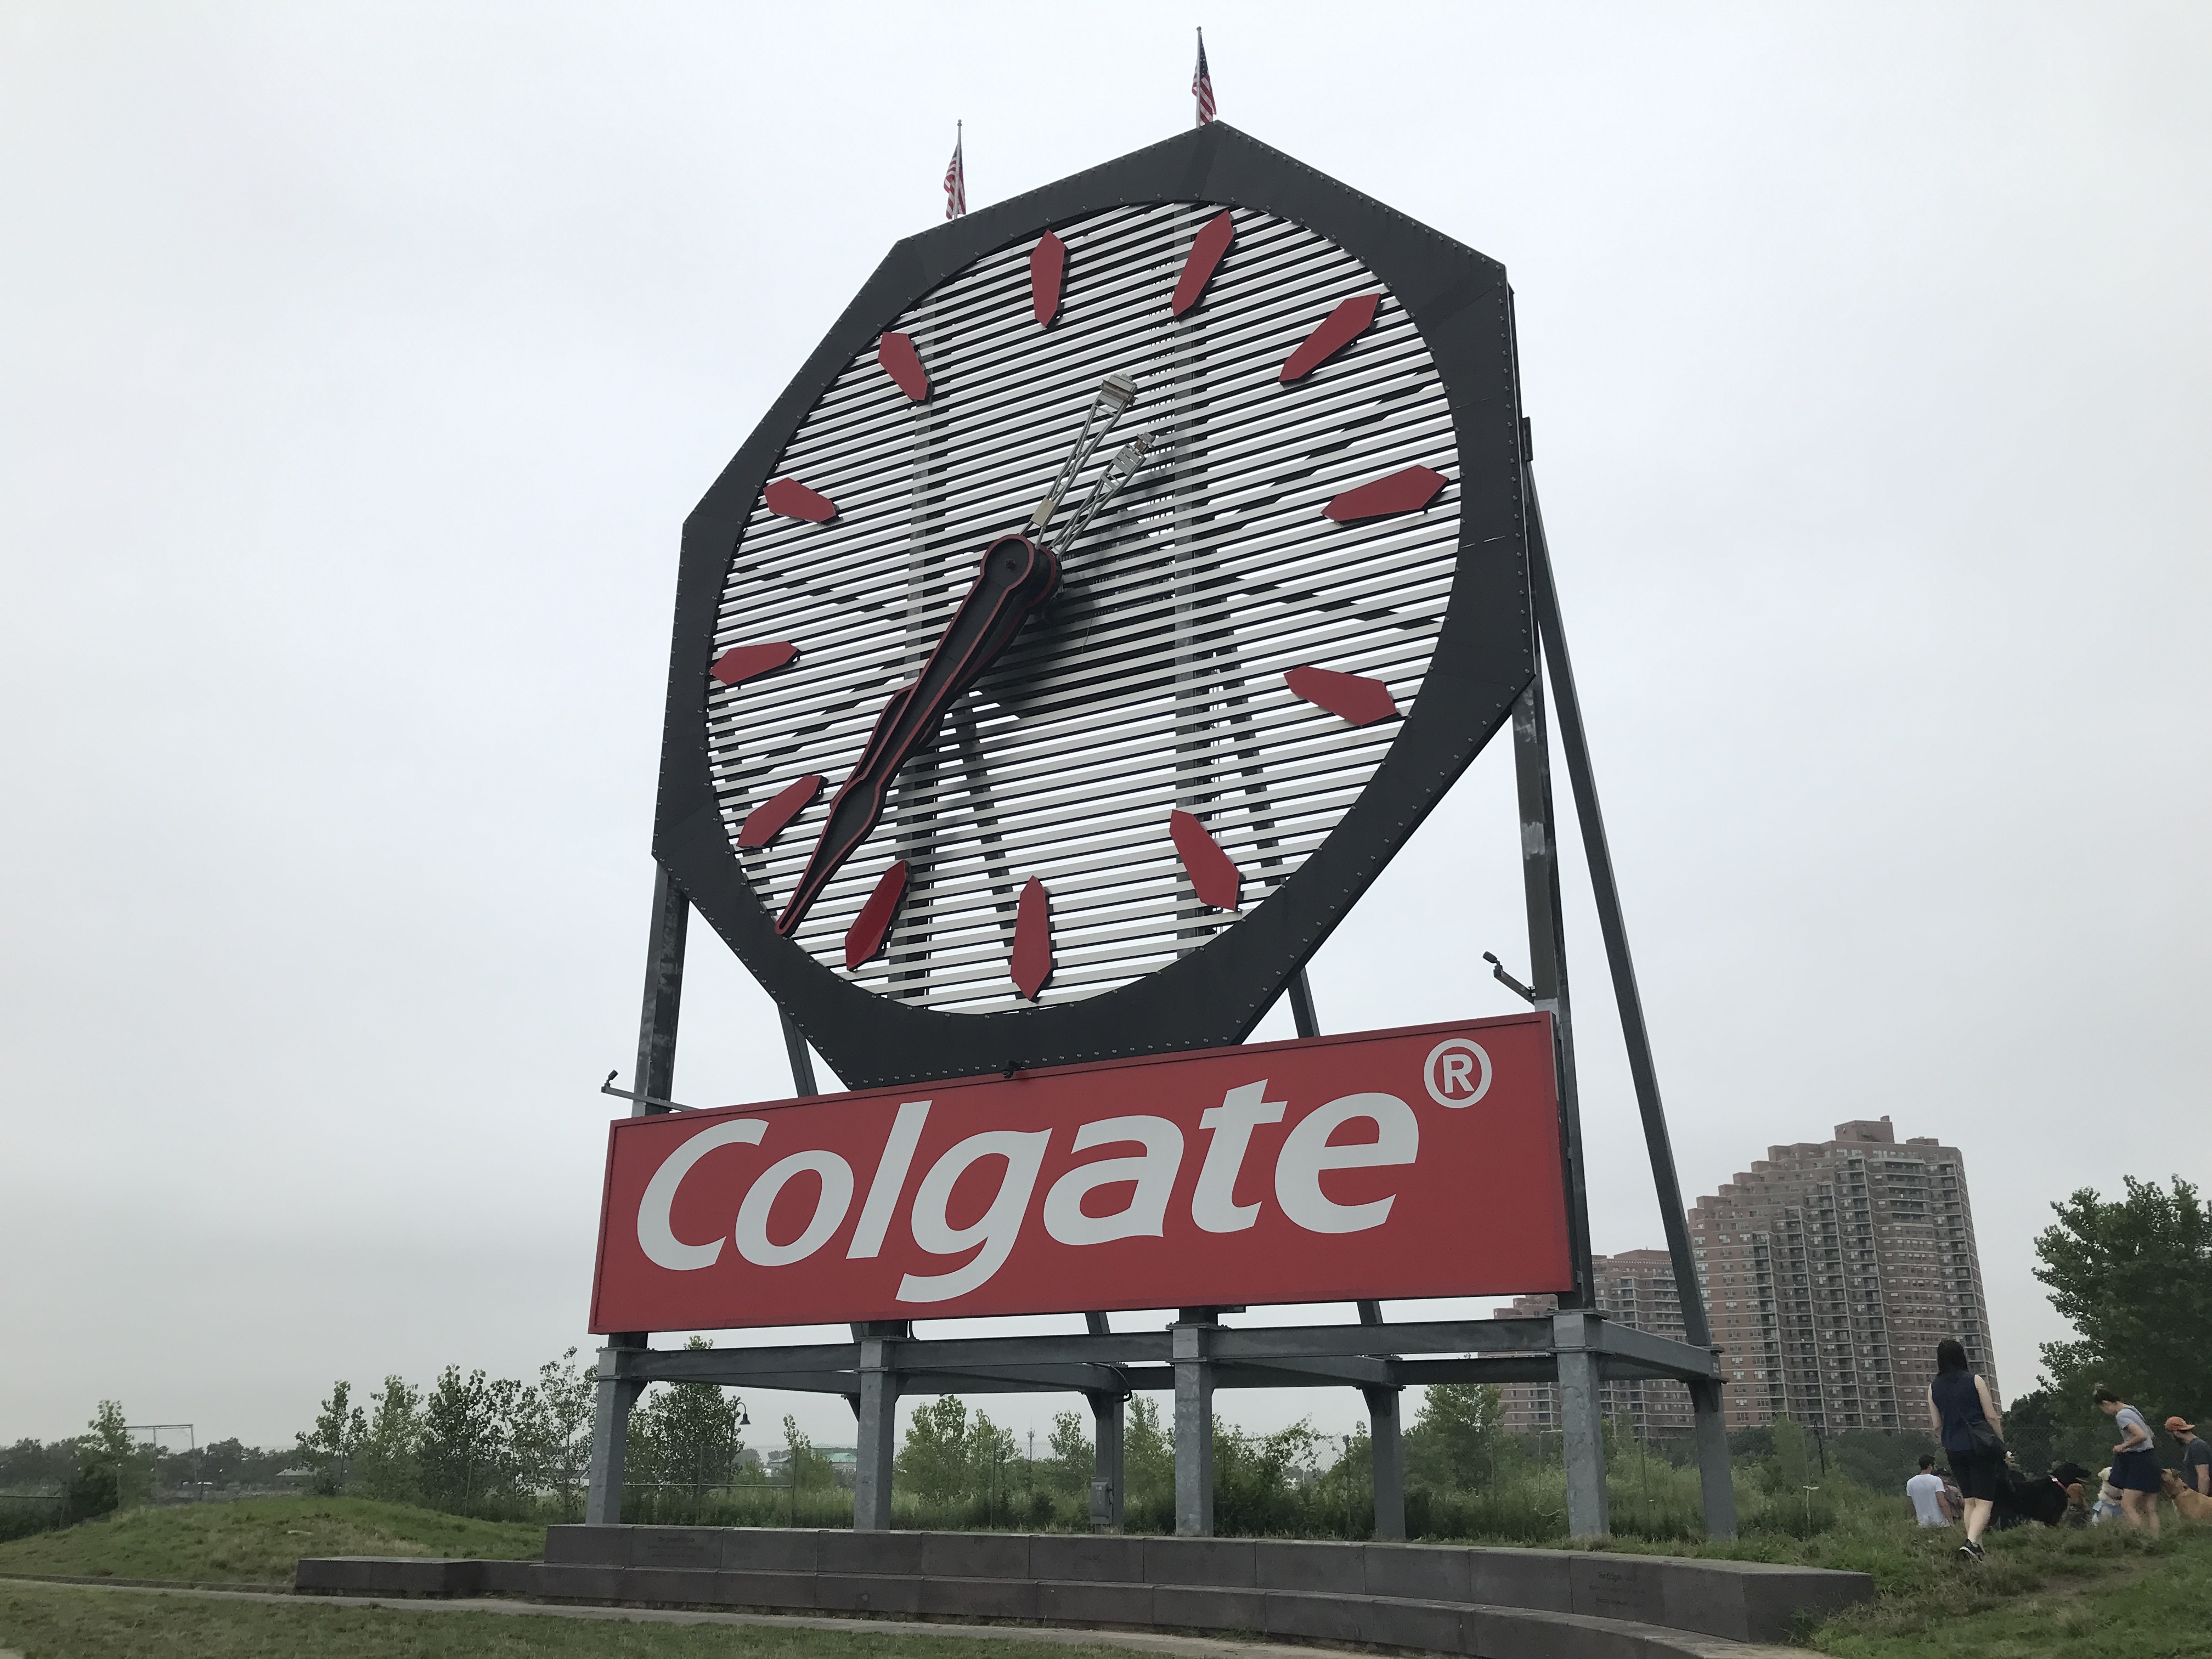 The red and white Colgate lettering logo is underneath the massive clock. The clock has red hour markings and black and red hands. Jersey City, New Jersey, United States. Sky is cloudy.